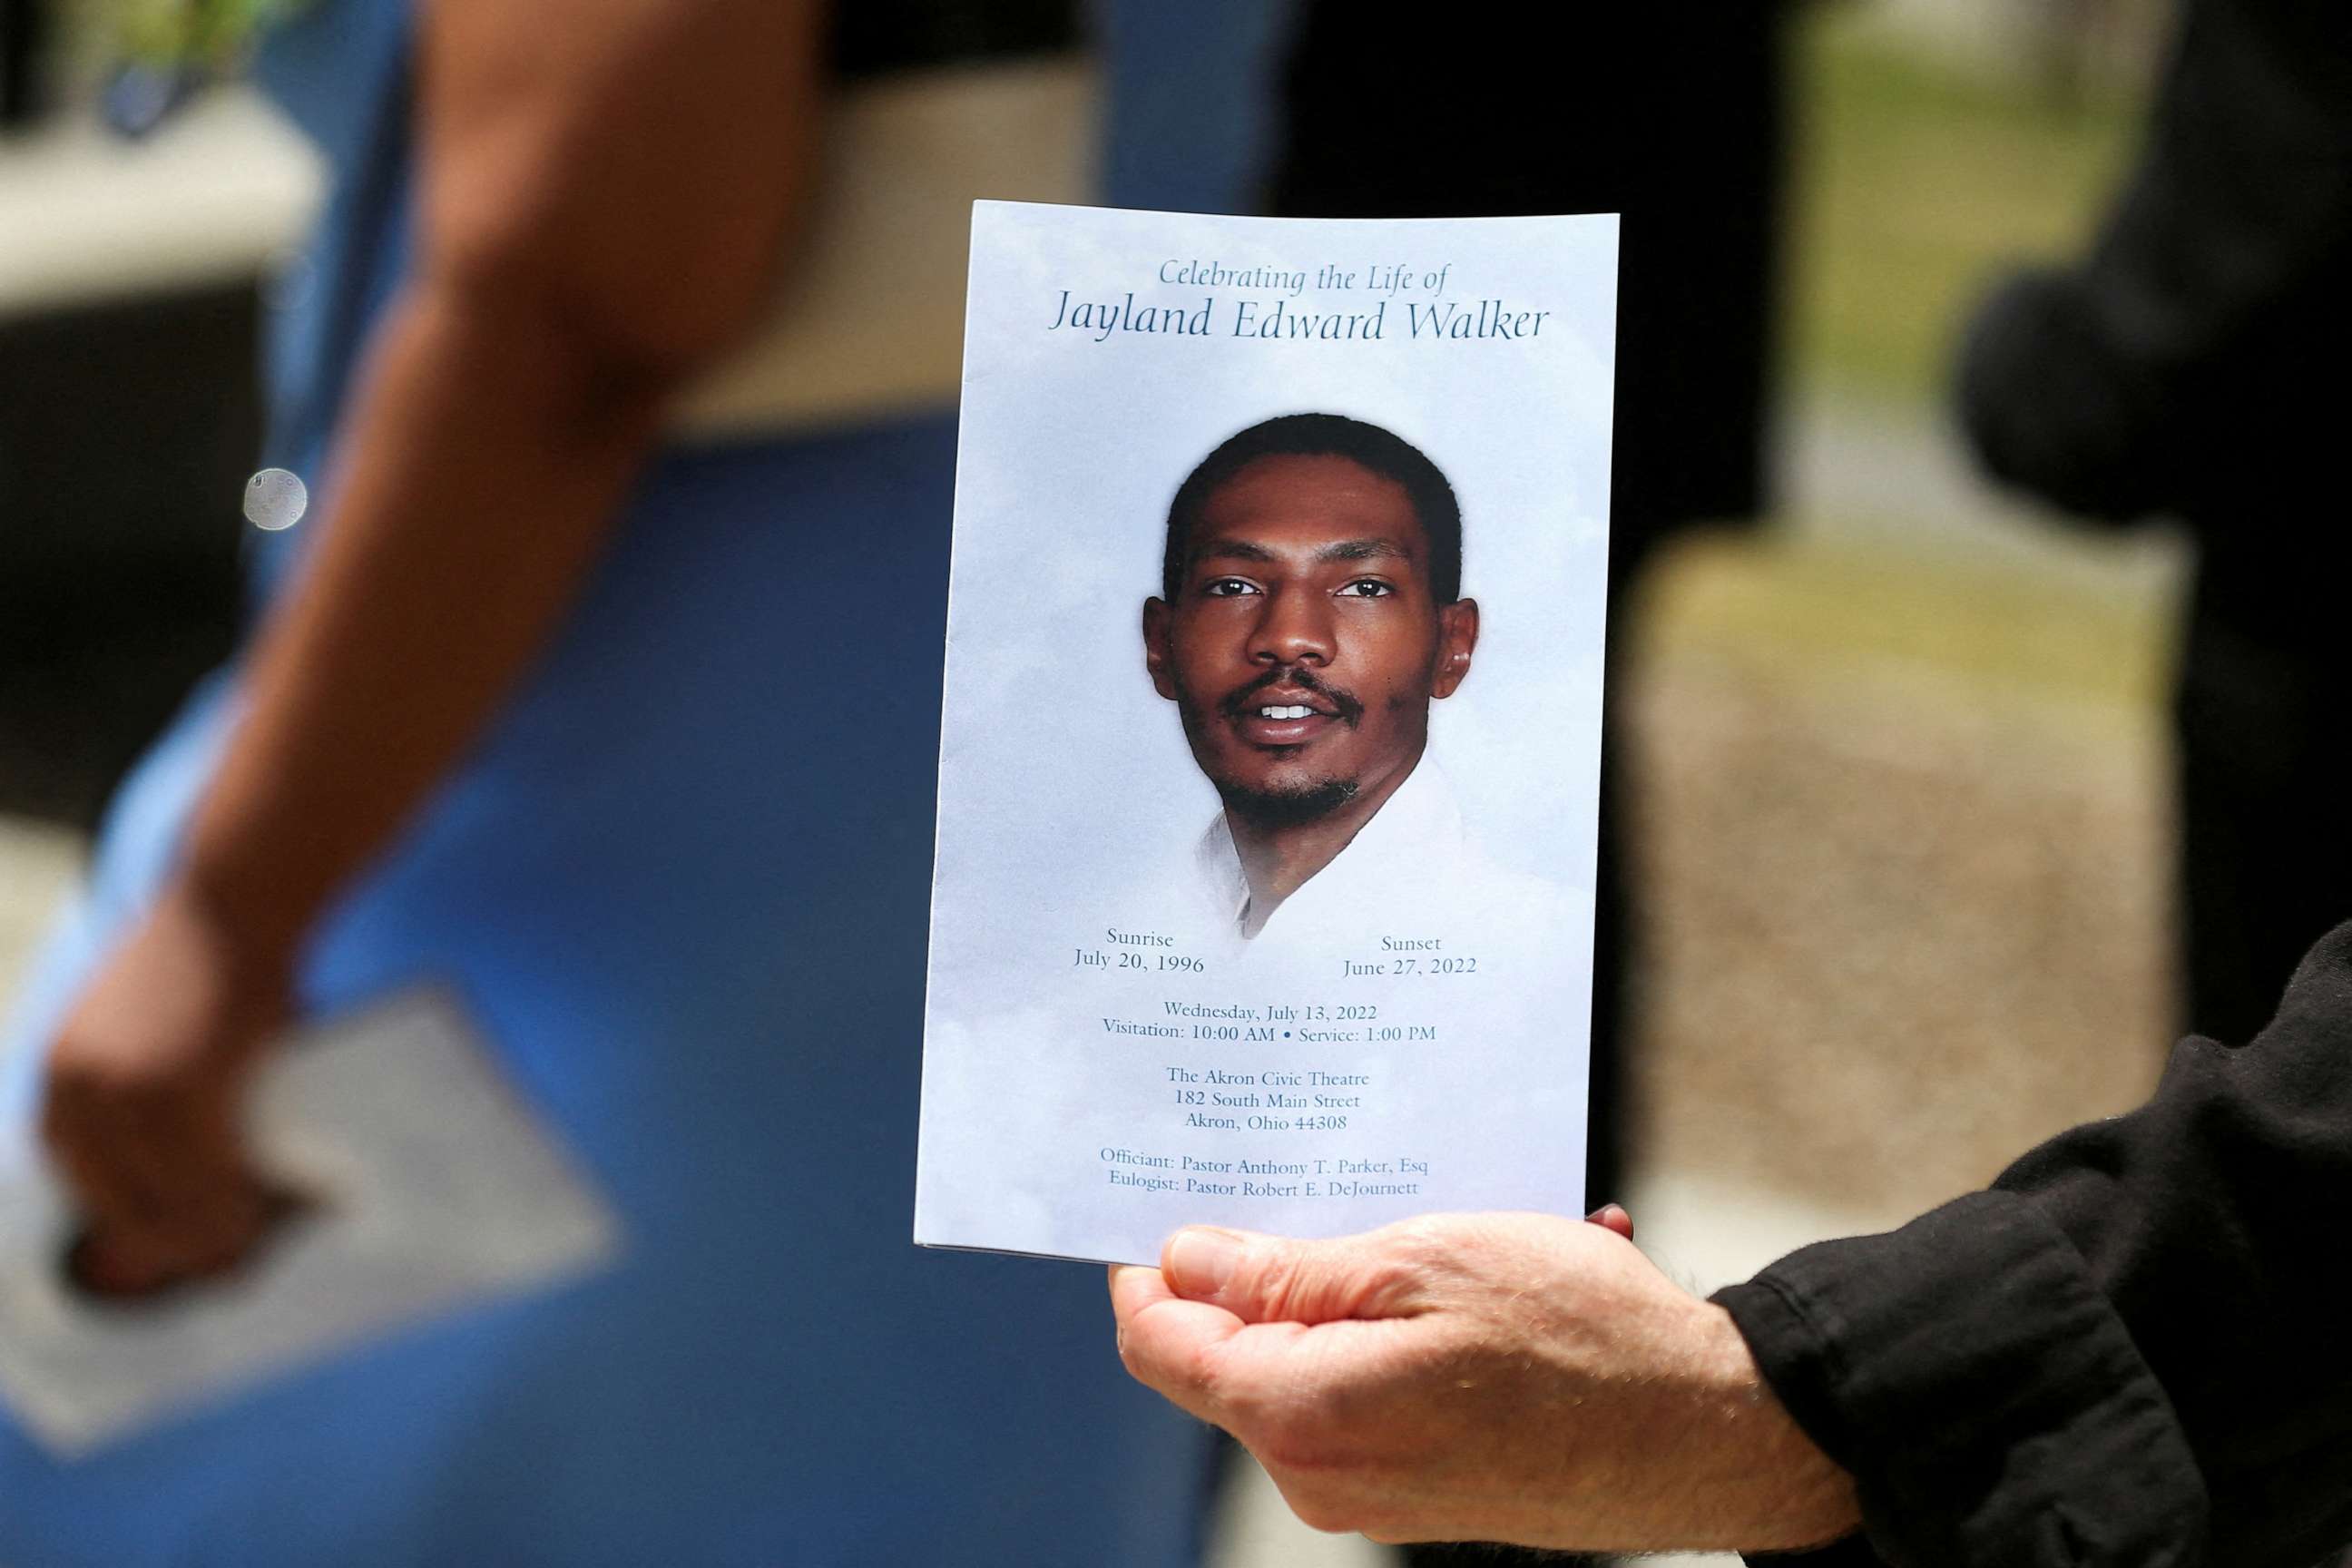 PHOTO: In this July 13, 2022, file photo, a man holds up the program following the funeral services for Jayland Walker, a 25 year old black man was shot to death by up to eight police officers on June 27, 2022, in Akron, Ohio.